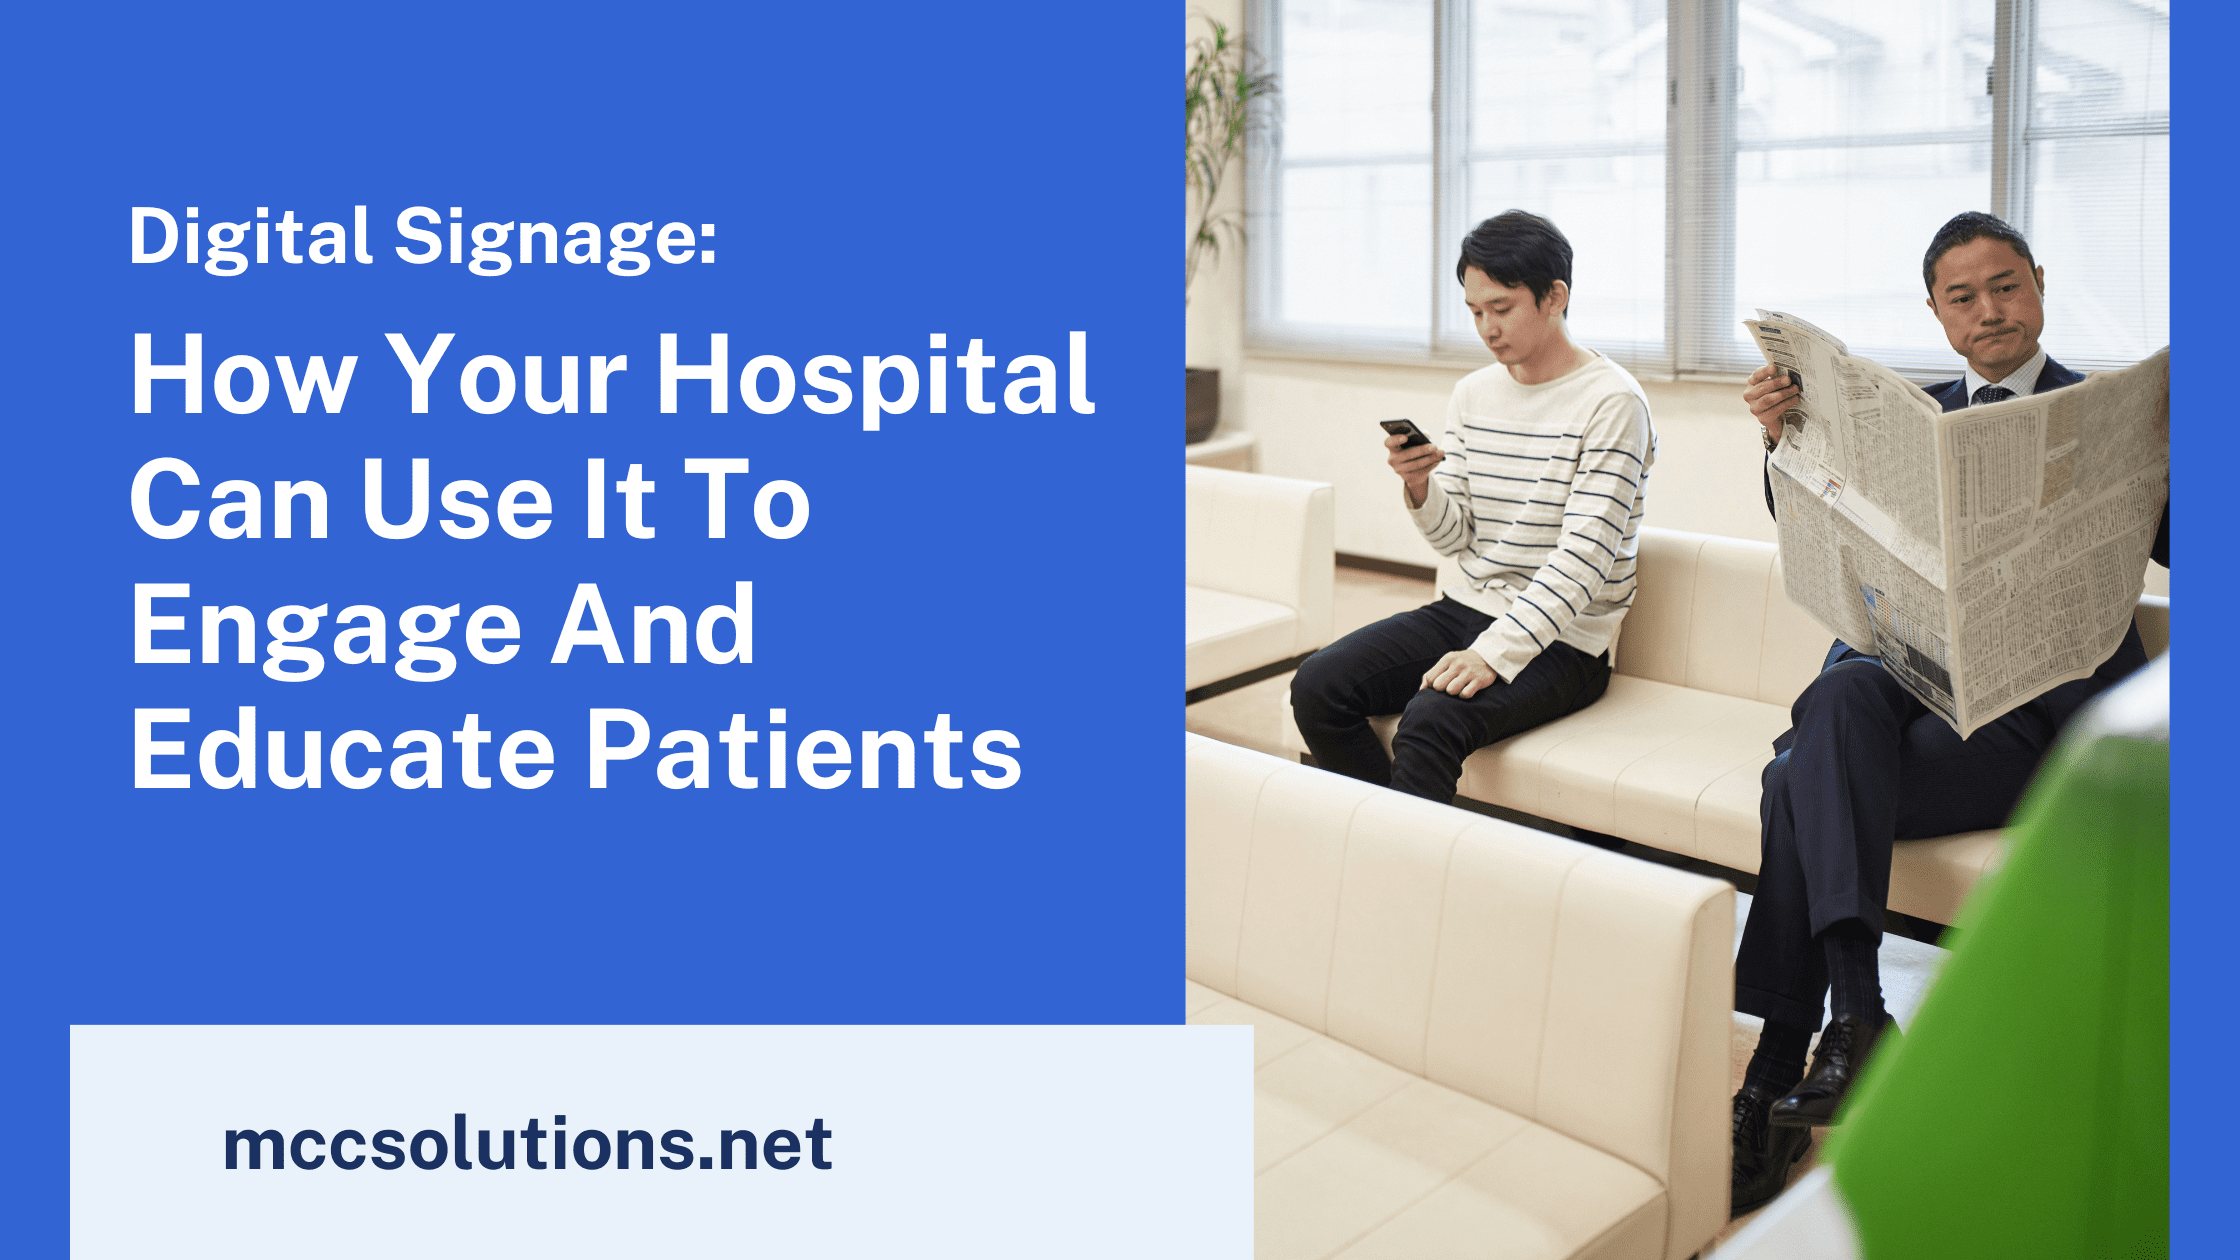 Digital Signage: How Your Hospital Can Use It To Engage and Educate Patients